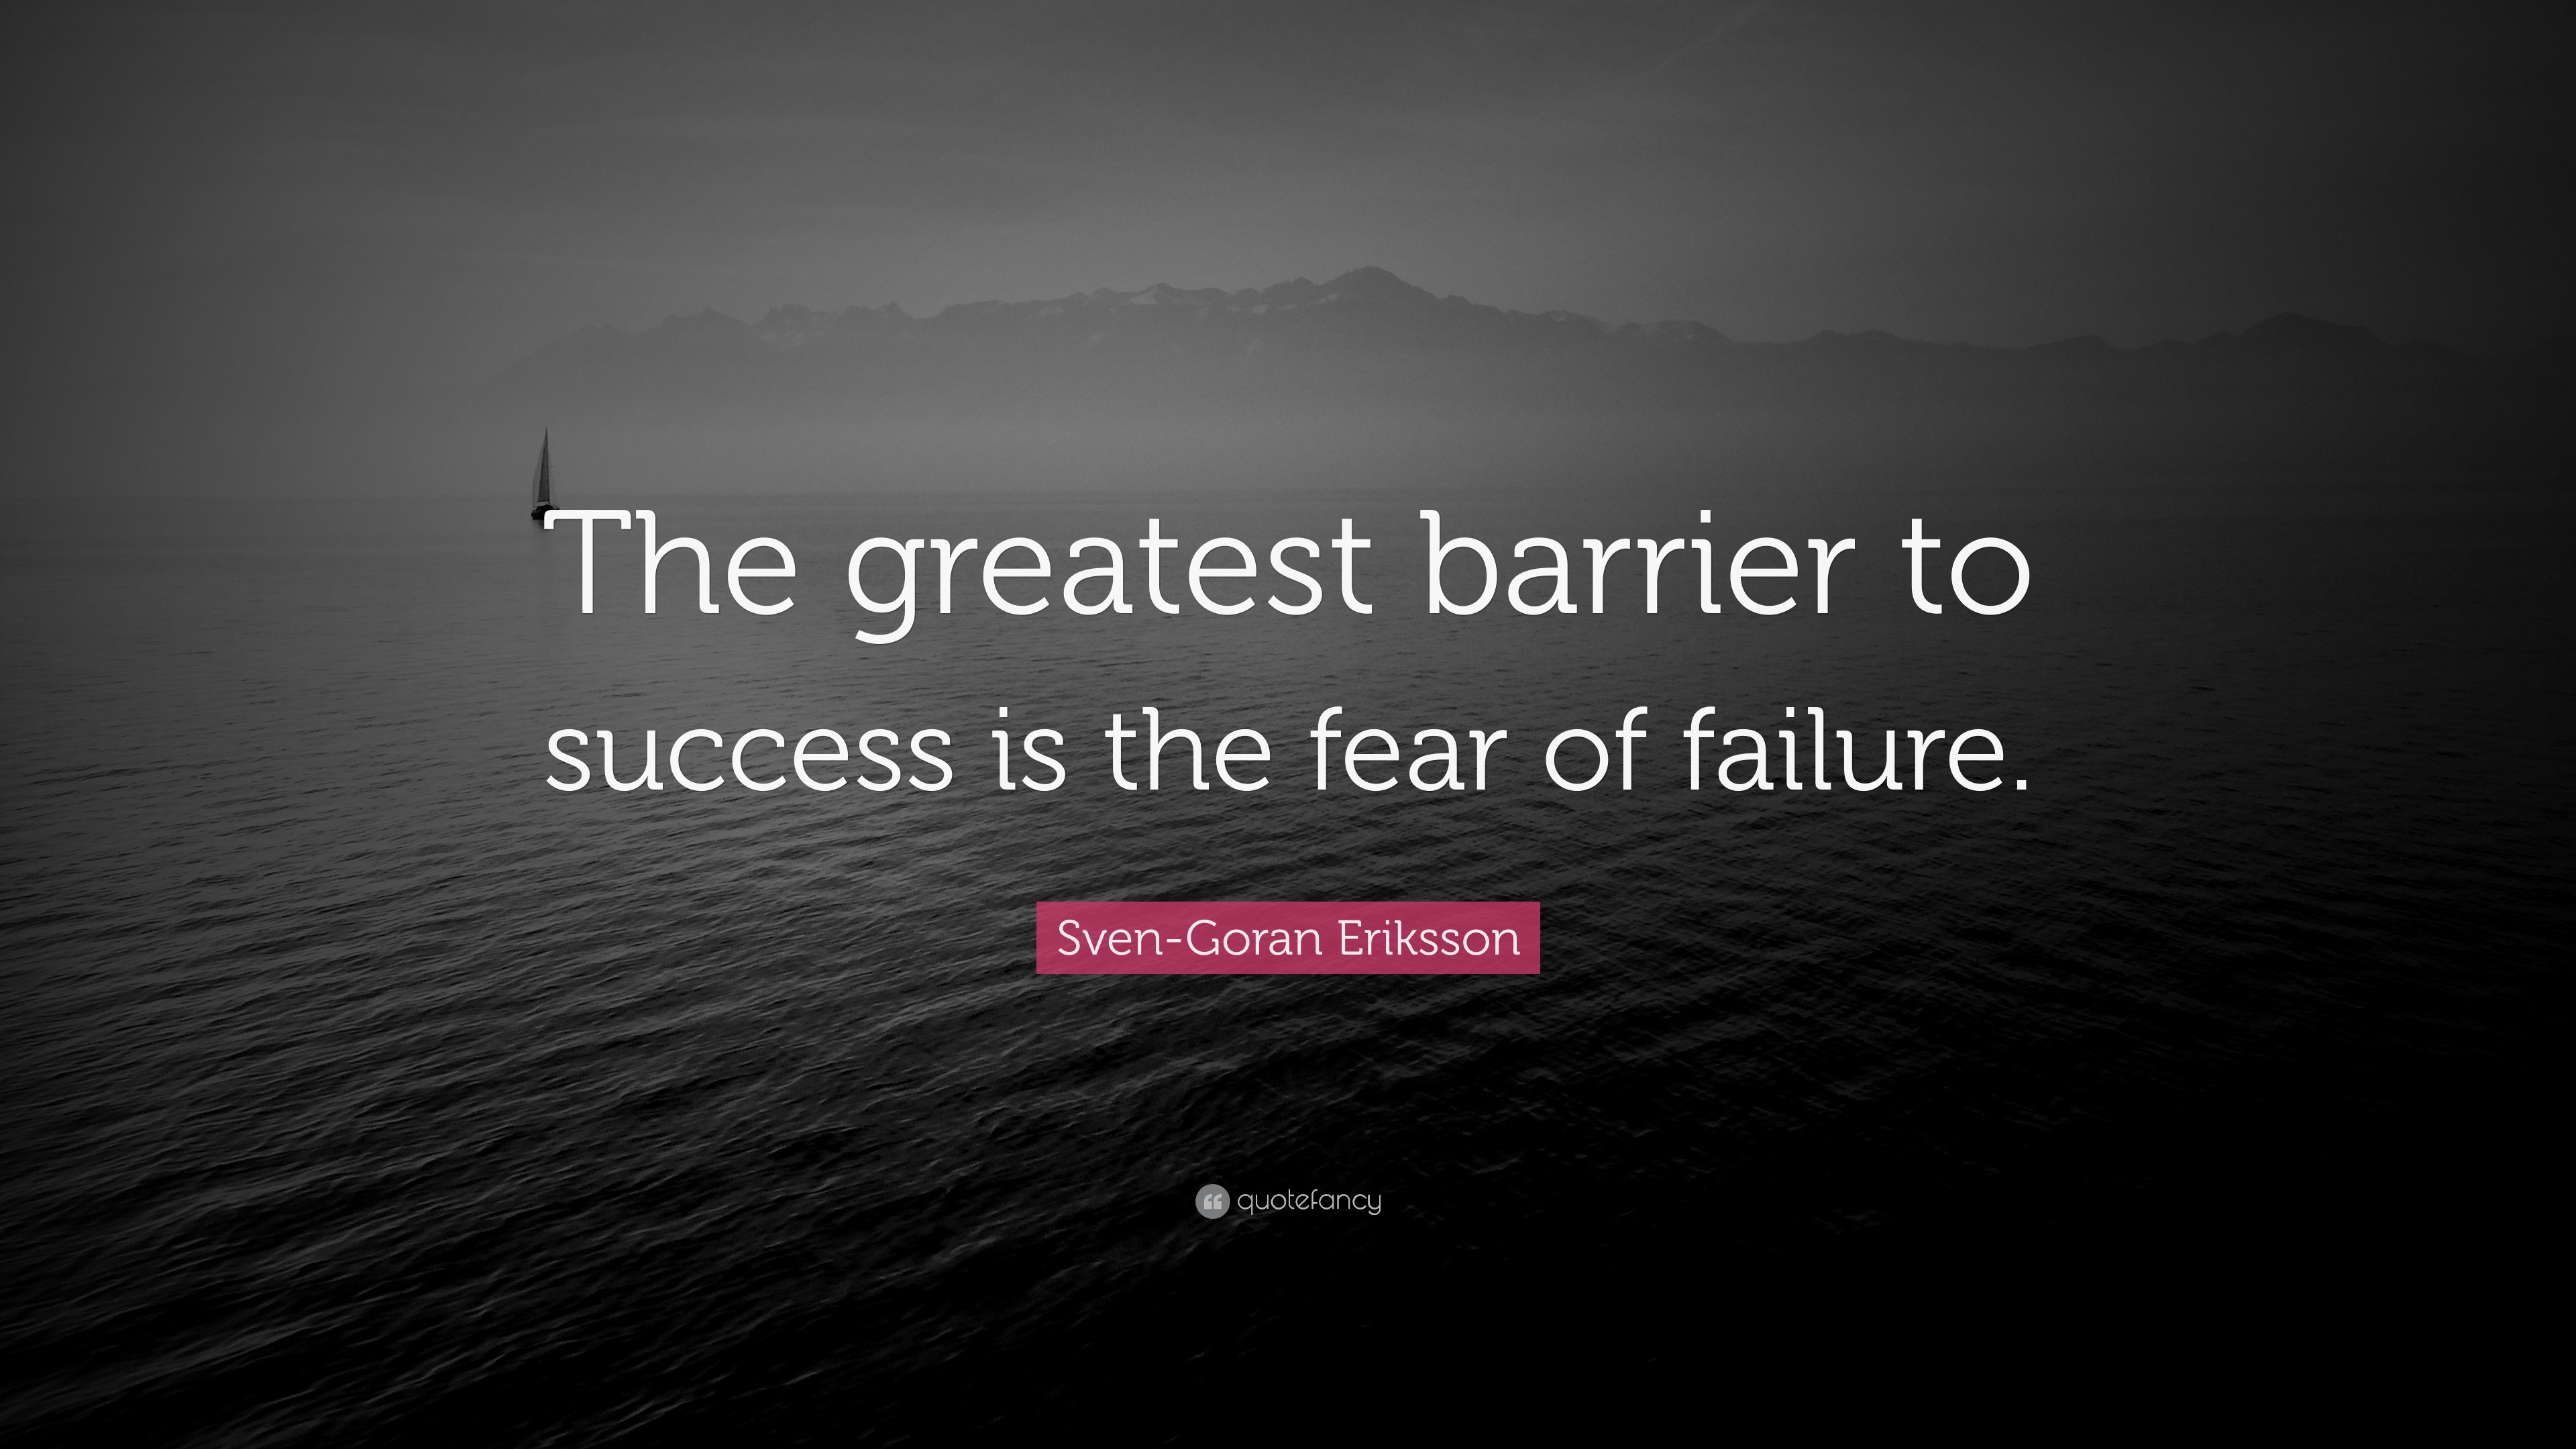 Sven-Goran Eriksson Quote: “The greatest barrier to success is the fear